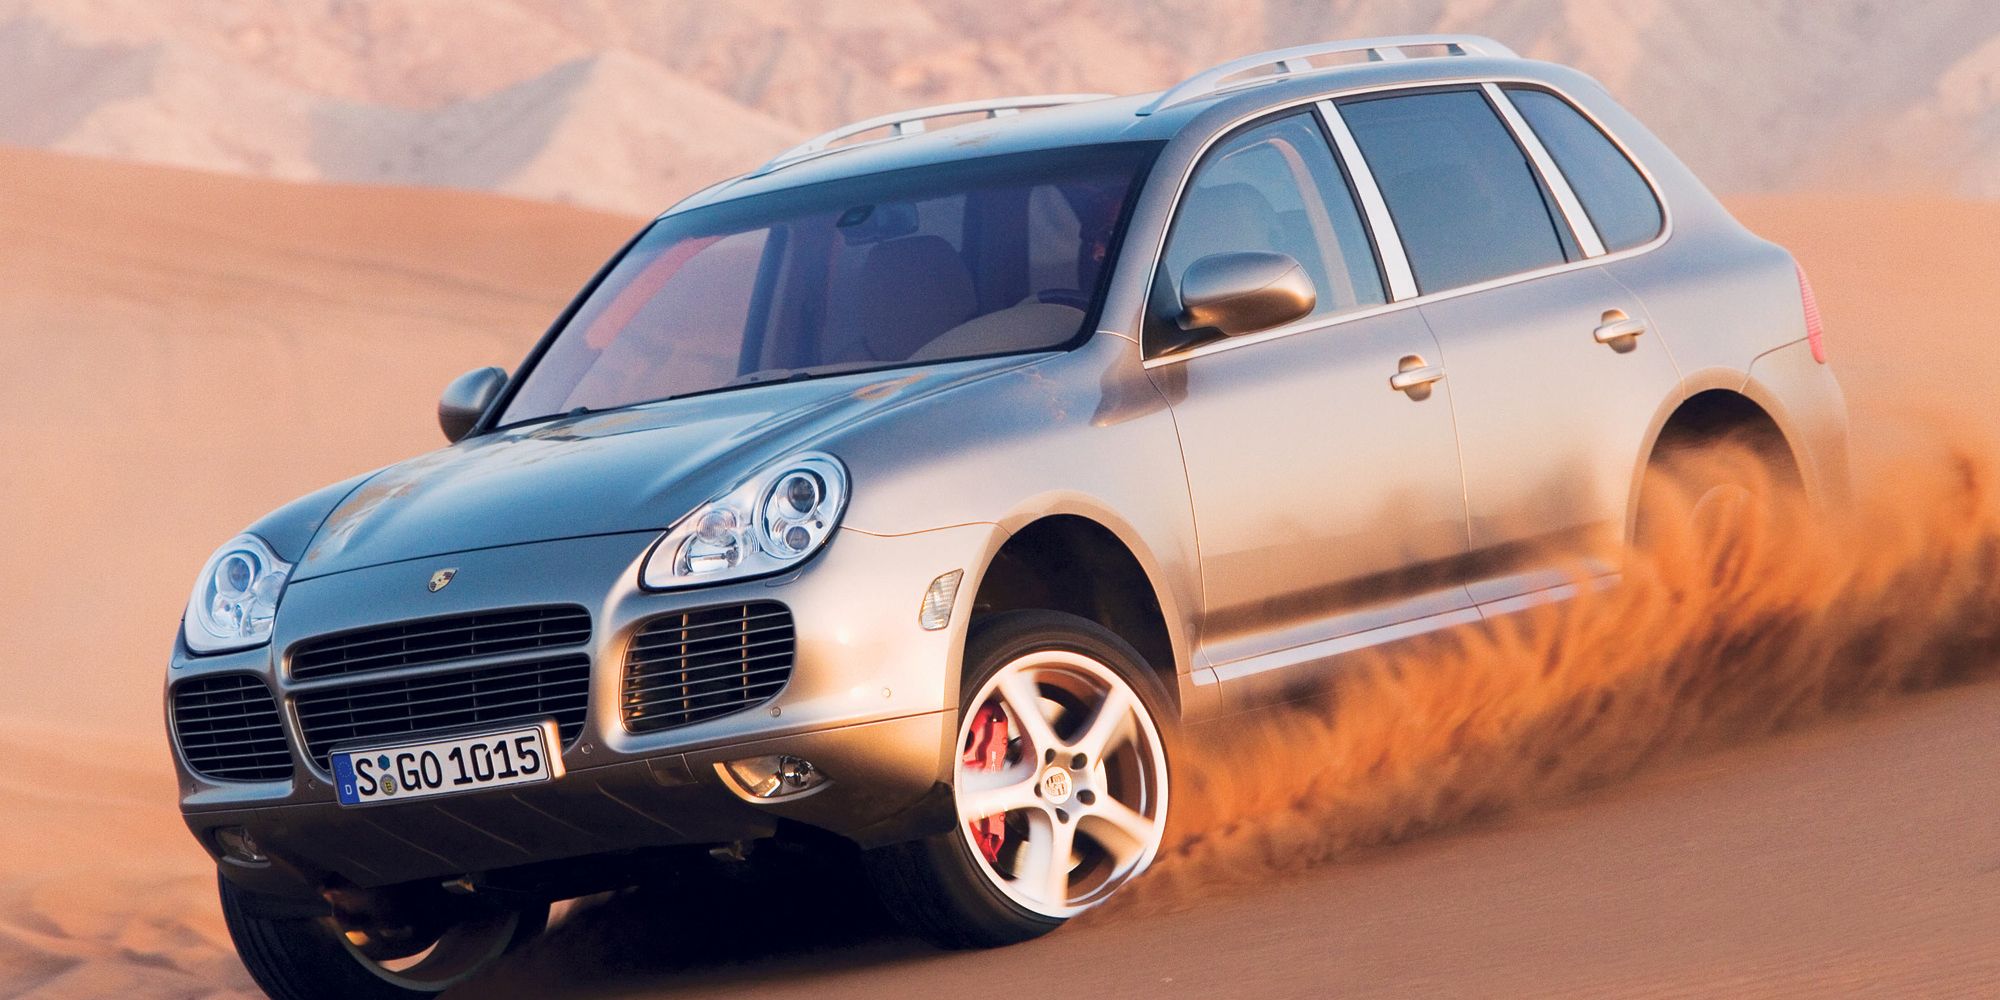 Front 3/4 view of the Cayenne Turbo blasting through the sand